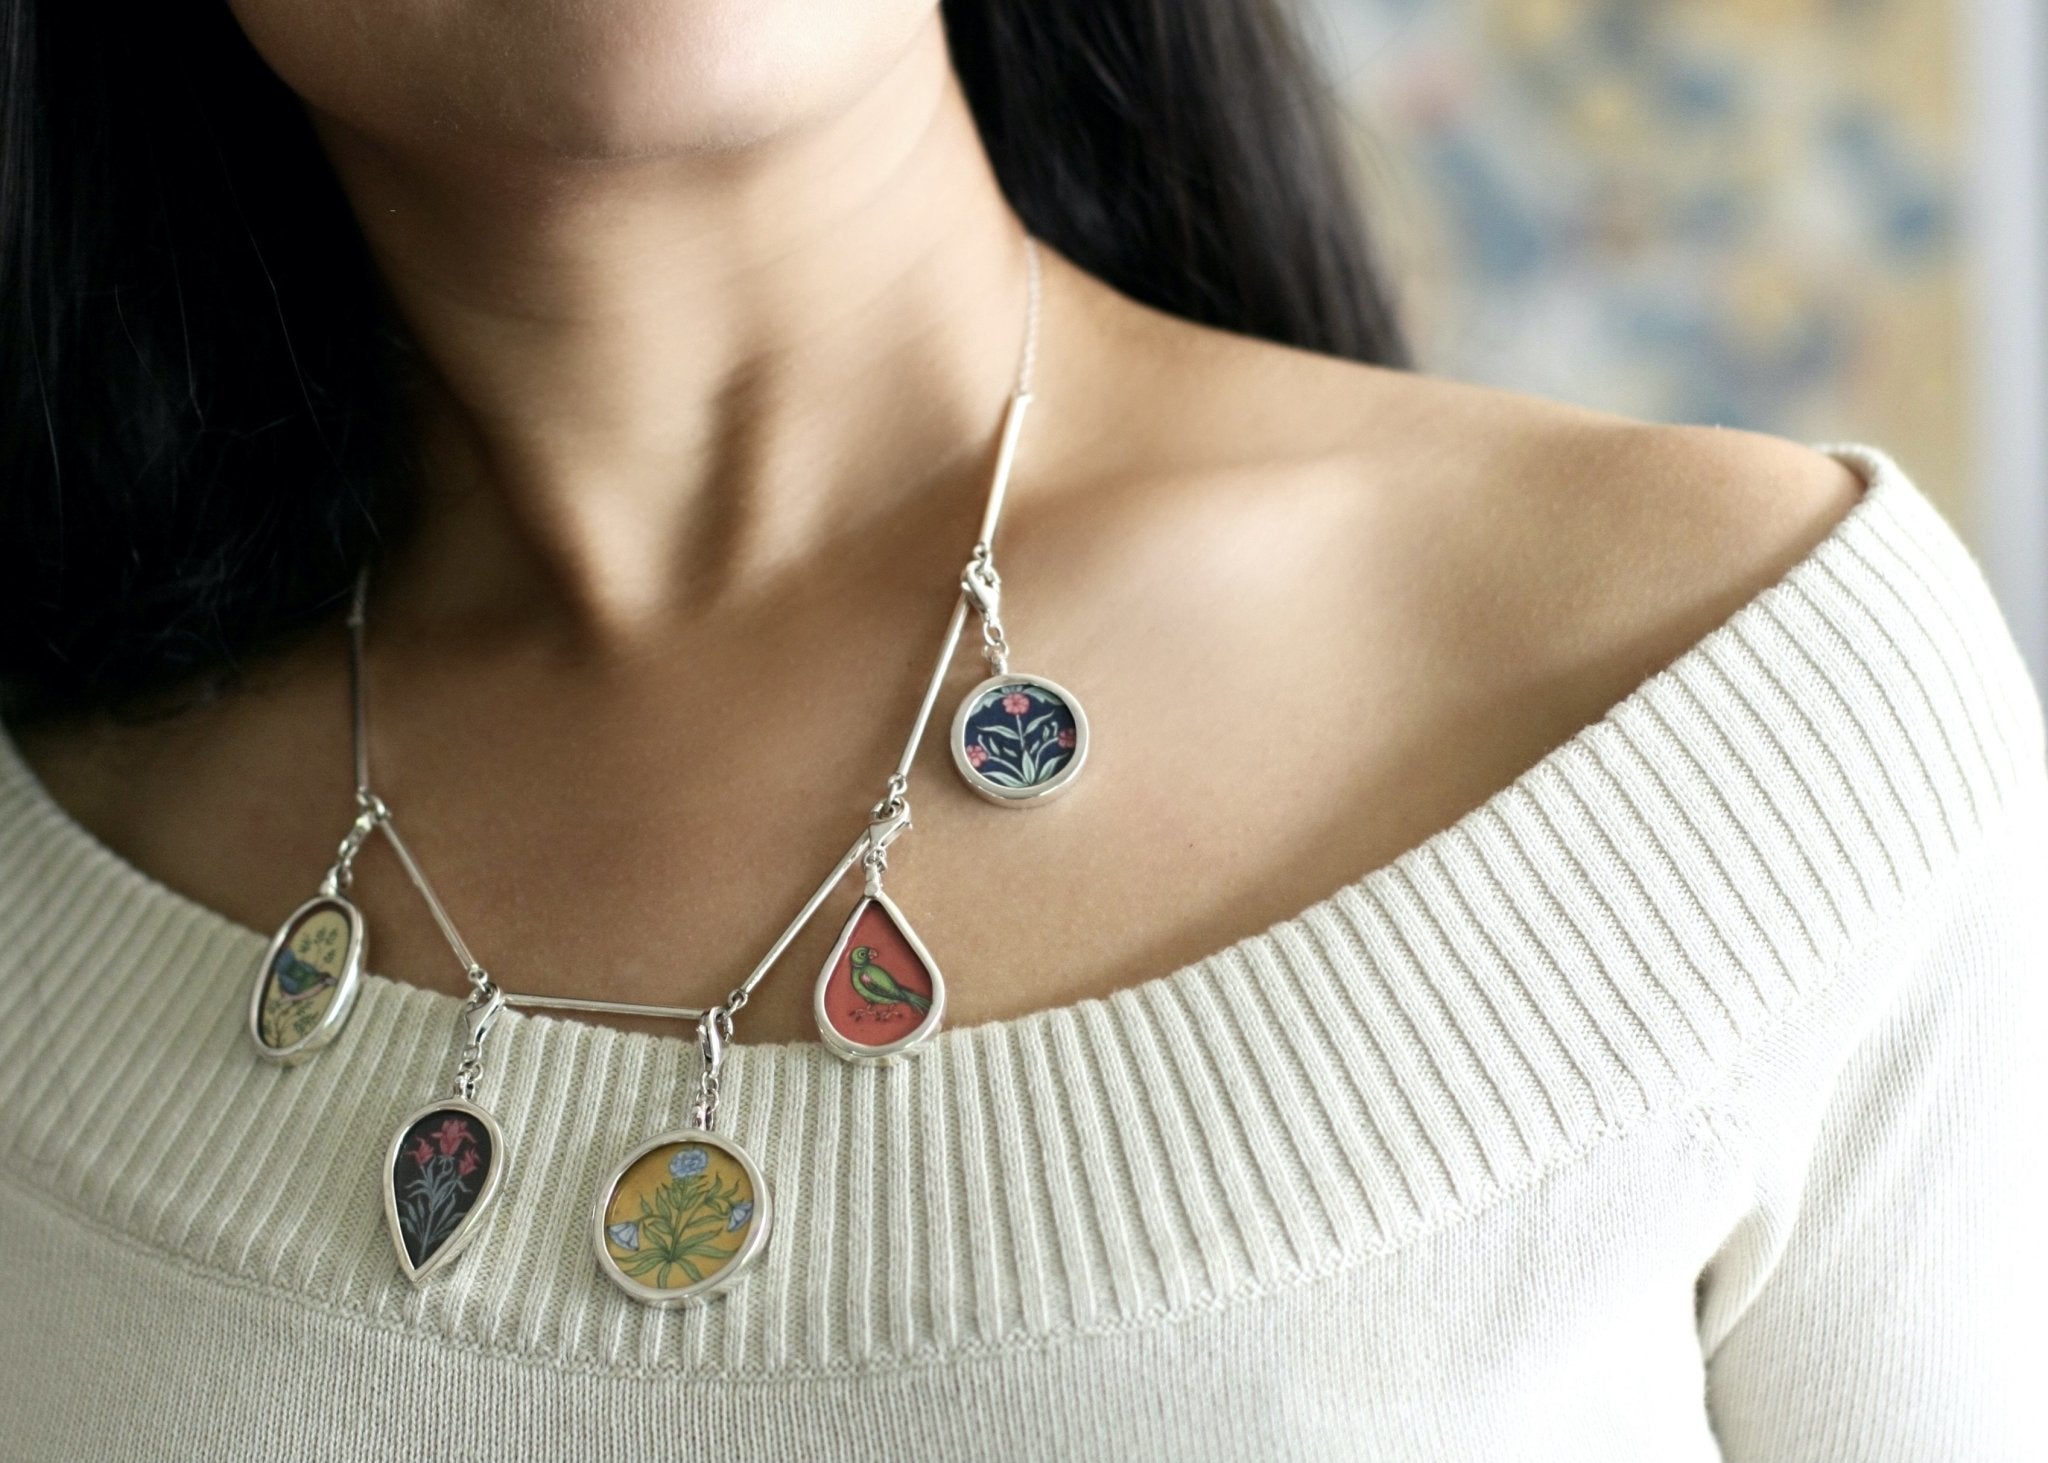 Dramatic, conversation-starting, linked necklace with miniature painting pendants - Lai